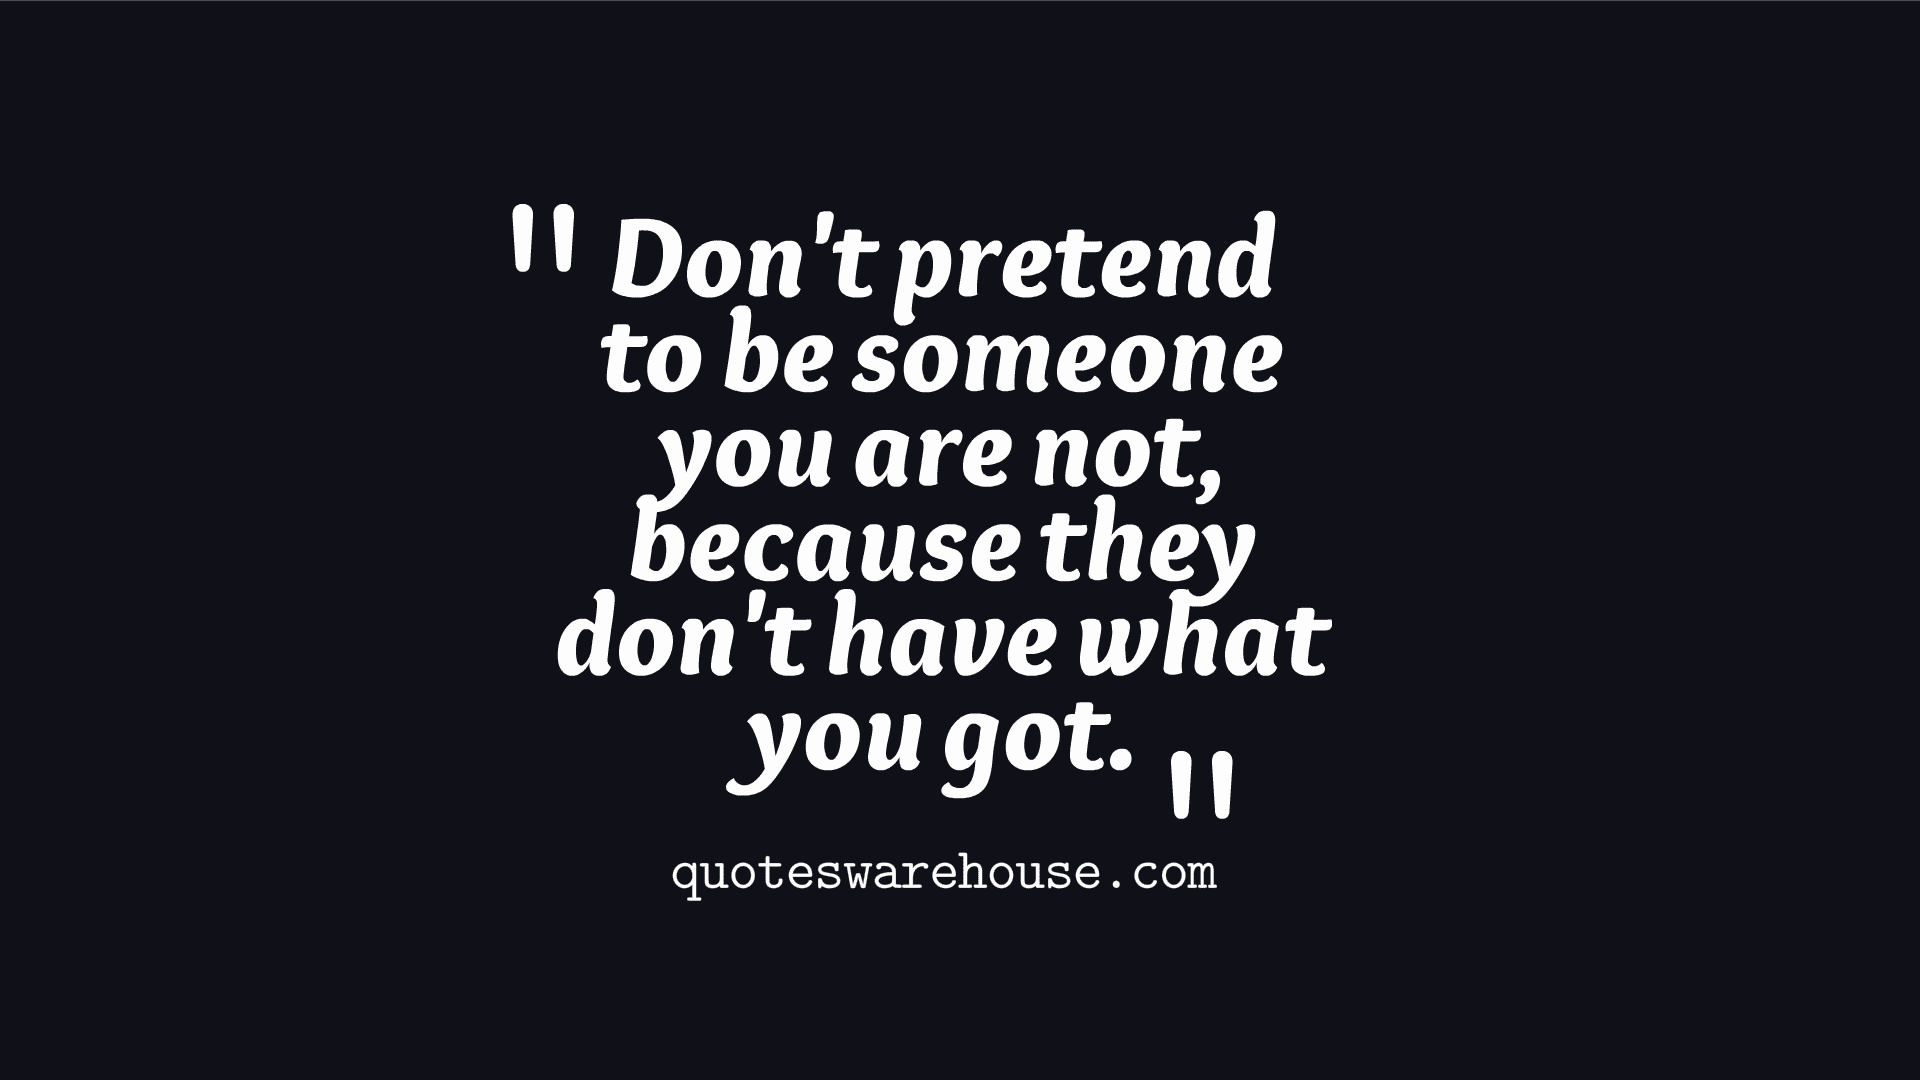 Inspirational-don't-pretend-to-be-someone-you-are-not